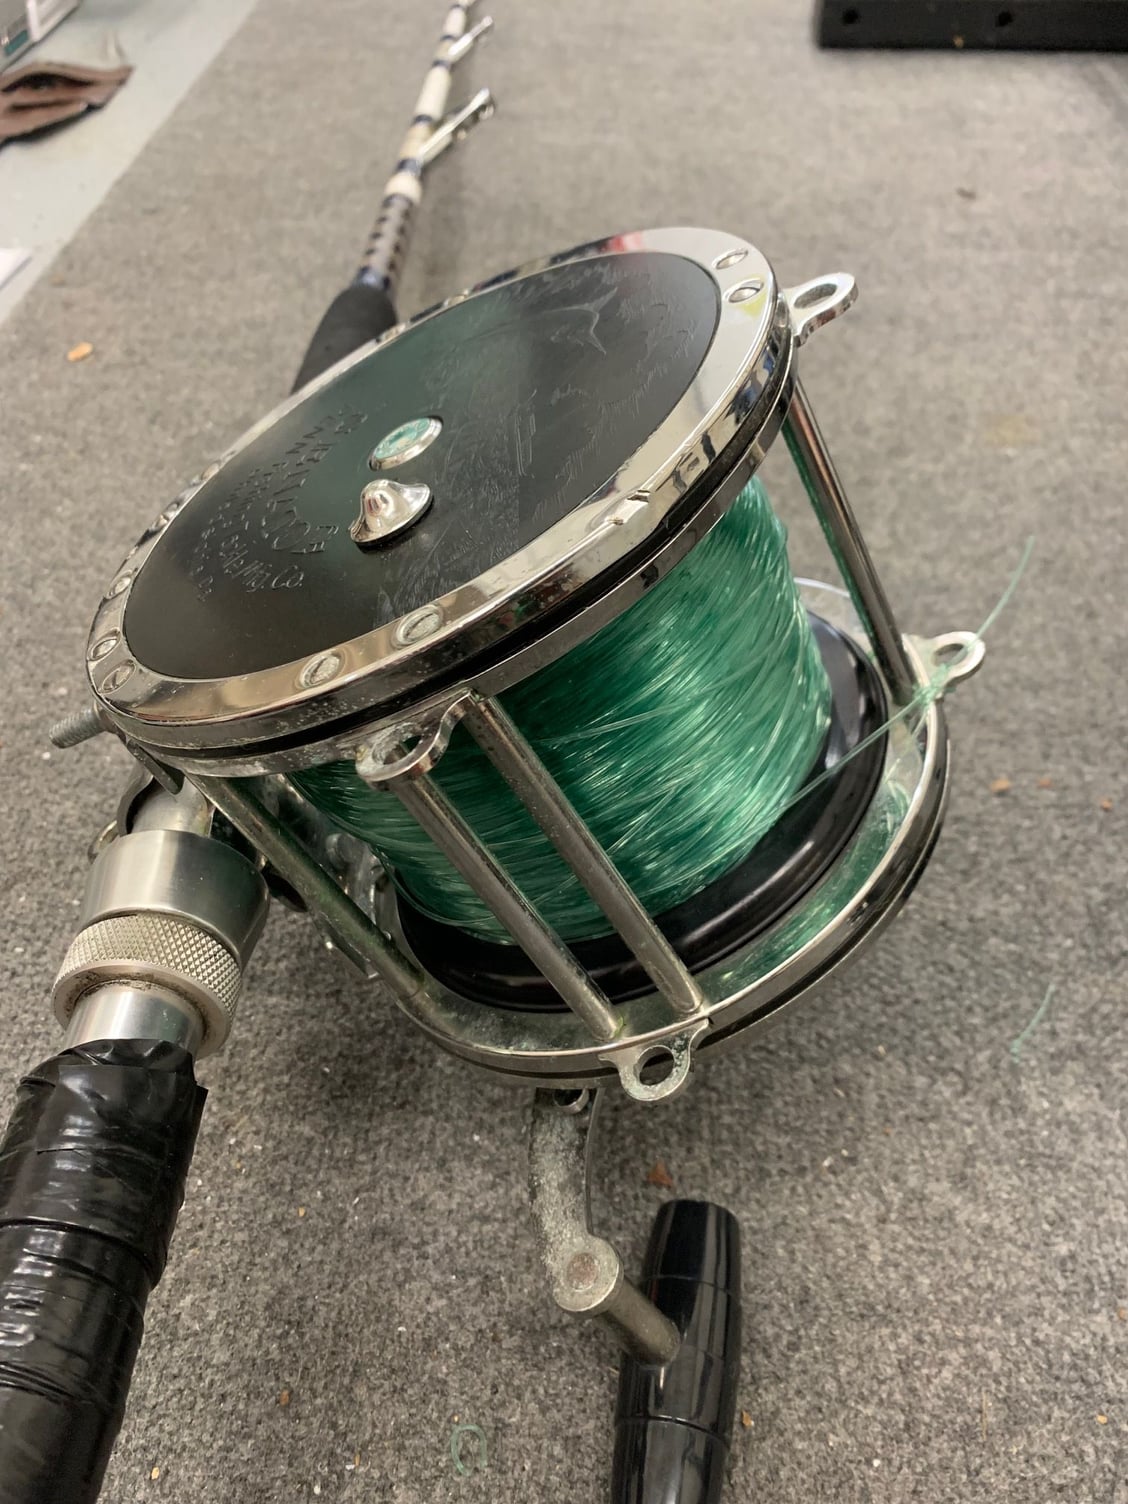 Lot of Fishing Gear for Sale!!! *130 Rod's & Reel's *LP24 $6,500 Near  Wilmington, NC - The Hull Truth - Boating and Fishing Forum